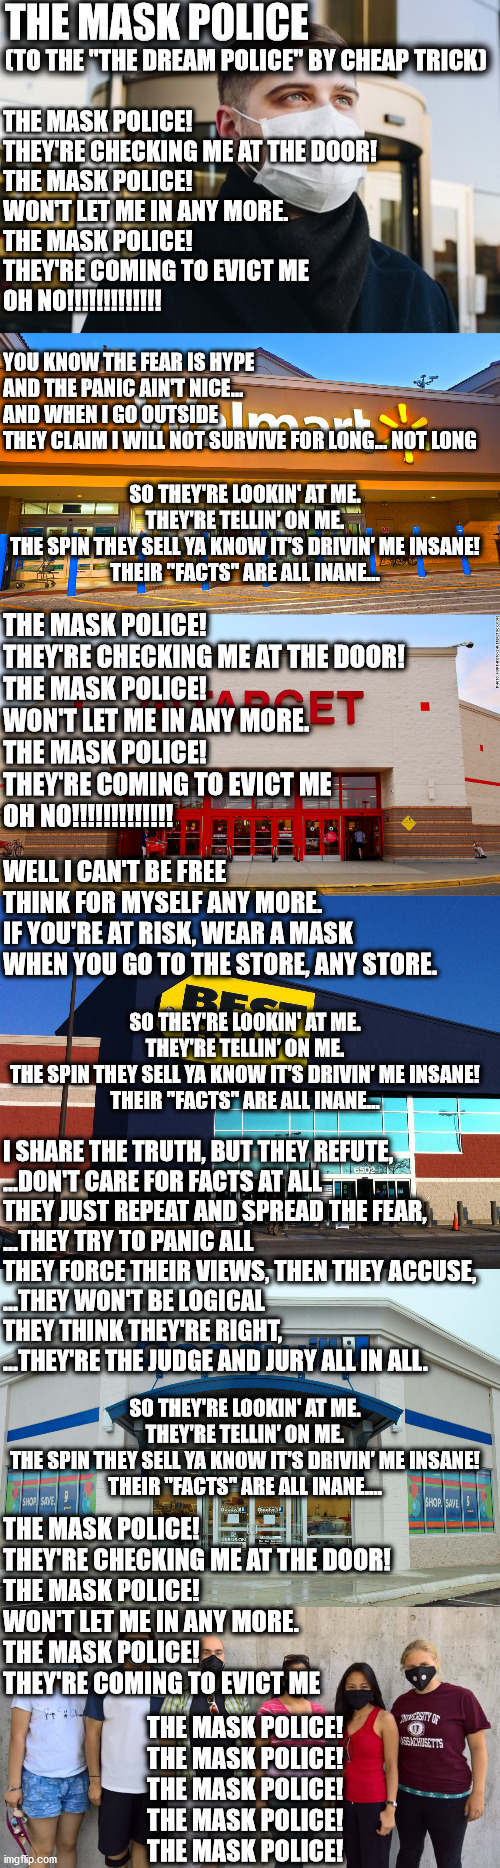 Walmart requiring masks now... when things are factually getting better, the lockdowns get tighter??? | THE MASK POLICE; (TO THE "THE DREAM POLICE" BY CHEAP TRICK); THE MASK POLICE! 
THEY'RE CHECKING ME AT THE DOOR!
THE MASK POLICE! 
WON'T LET ME IN ANY MORE.
THE MASK POLICE! 
THEY'RE COMING TO EVICT ME
OH NO!!!!!!!!!!!!! YOU KNOW THE FEAR IS HYPE
AND THE PANIC AIN'T NICE...
AND WHEN I GO OUTSIDE
THEY CLAIM I WILL NOT SURVIVE FOR LONG... NOT LONG; SO THEY'RE LOOKIN' AT ME.
THEY'RE TELLIN' ON ME.
THE SPIN THEY SELL YA KNOW IT'S DRIVIN' ME INSANE!
THEIR "FACTS" ARE ALL INANE... THE MASK POLICE! 
THEY'RE CHECKING ME AT THE DOOR!
THE MASK POLICE! 
WON'T LET ME IN ANY MORE.
THE MASK POLICE! 
THEY'RE COMING TO EVICT ME
OH NO!!!!!!!!!!!!! WELL I CAN'T BE FREE
THINK FOR MYSELF ANY MORE.
IF YOU'RE AT RISK, WEAR A MASK
WHEN YOU GO TO THE STORE, ANY STORE. SO THEY'RE LOOKIN' AT ME.
THEY'RE TELLIN' ON ME.
THE SPIN THEY SELL YA KNOW IT'S DRIVIN' ME INSANE!
THEIR "FACTS" ARE ALL INANE... I SHARE THE TRUTH, BUT THEY REFUTE, 
...DON'T CARE FOR FACTS AT ALL
THEY JUST REPEAT AND SPREAD THE FEAR, 
...THEY TRY TO PANIC ALL
THEY FORCE THEIR VIEWS, THEN THEY ACCUSE, 
...THEY WON'T BE LOGICAL
THEY THINK THEY'RE RIGHT, 
...THEY'RE THE JUDGE AND JURY ALL IN ALL. SO THEY'RE LOOKIN' AT ME.
THEY'RE TELLIN' ON ME.
THE SPIN THEY SELL YA KNOW IT'S DRIVIN' ME INSANE!
THEIR "FACTS" ARE ALL INANE.... THE MASK POLICE! 
THEY'RE CHECKING ME AT THE DOOR!
THE MASK POLICE! 
WON'T LET ME IN ANY MORE.
THE MASK POLICE! 
THEY'RE COMING TO EVICT ME; THE MASK POLICE!
THE MASK POLICE!
THE MASK POLICE!
THE MASK POLICE!
THE MASK POLICE! | image tagged in facemask  fearmask,walmart,target,best buy,goodwill,covid-19 | made w/ Imgflip meme maker